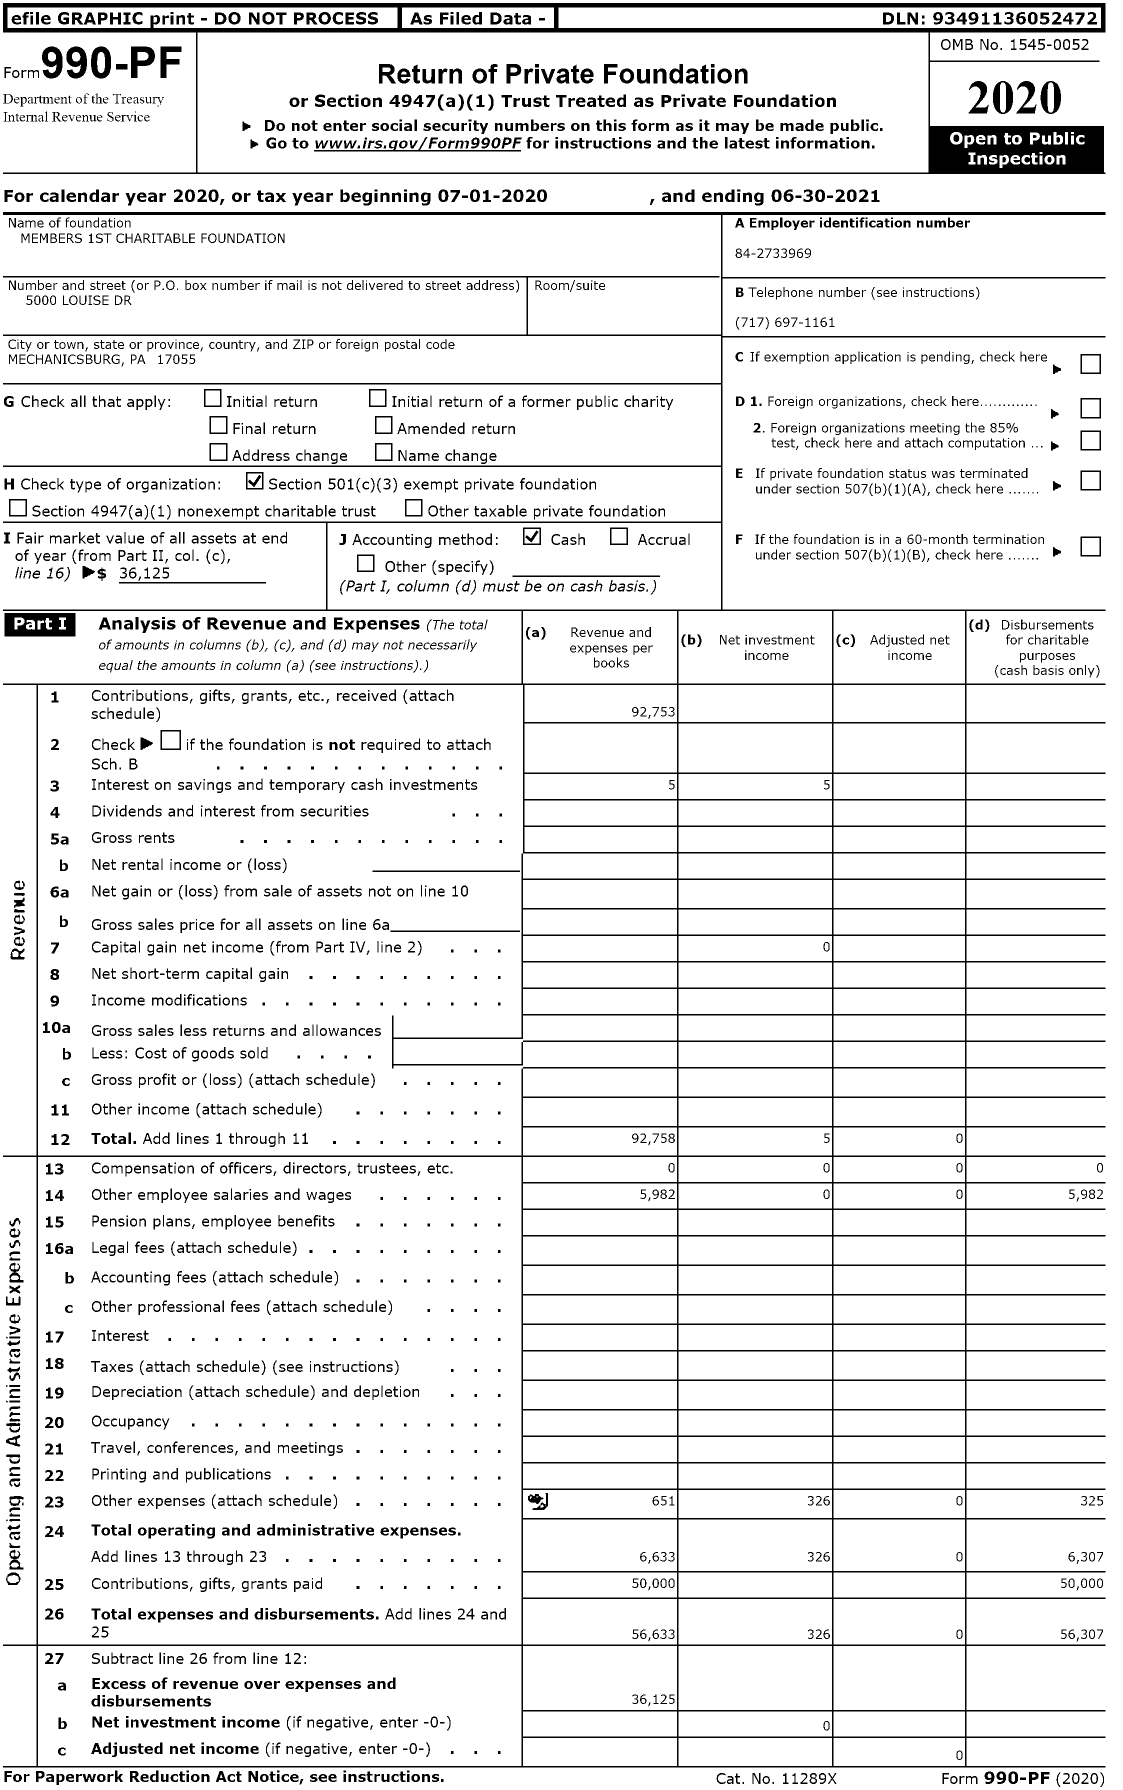 Image of first page of 2020 Form 990PF for Members 1st Charitable Foundation